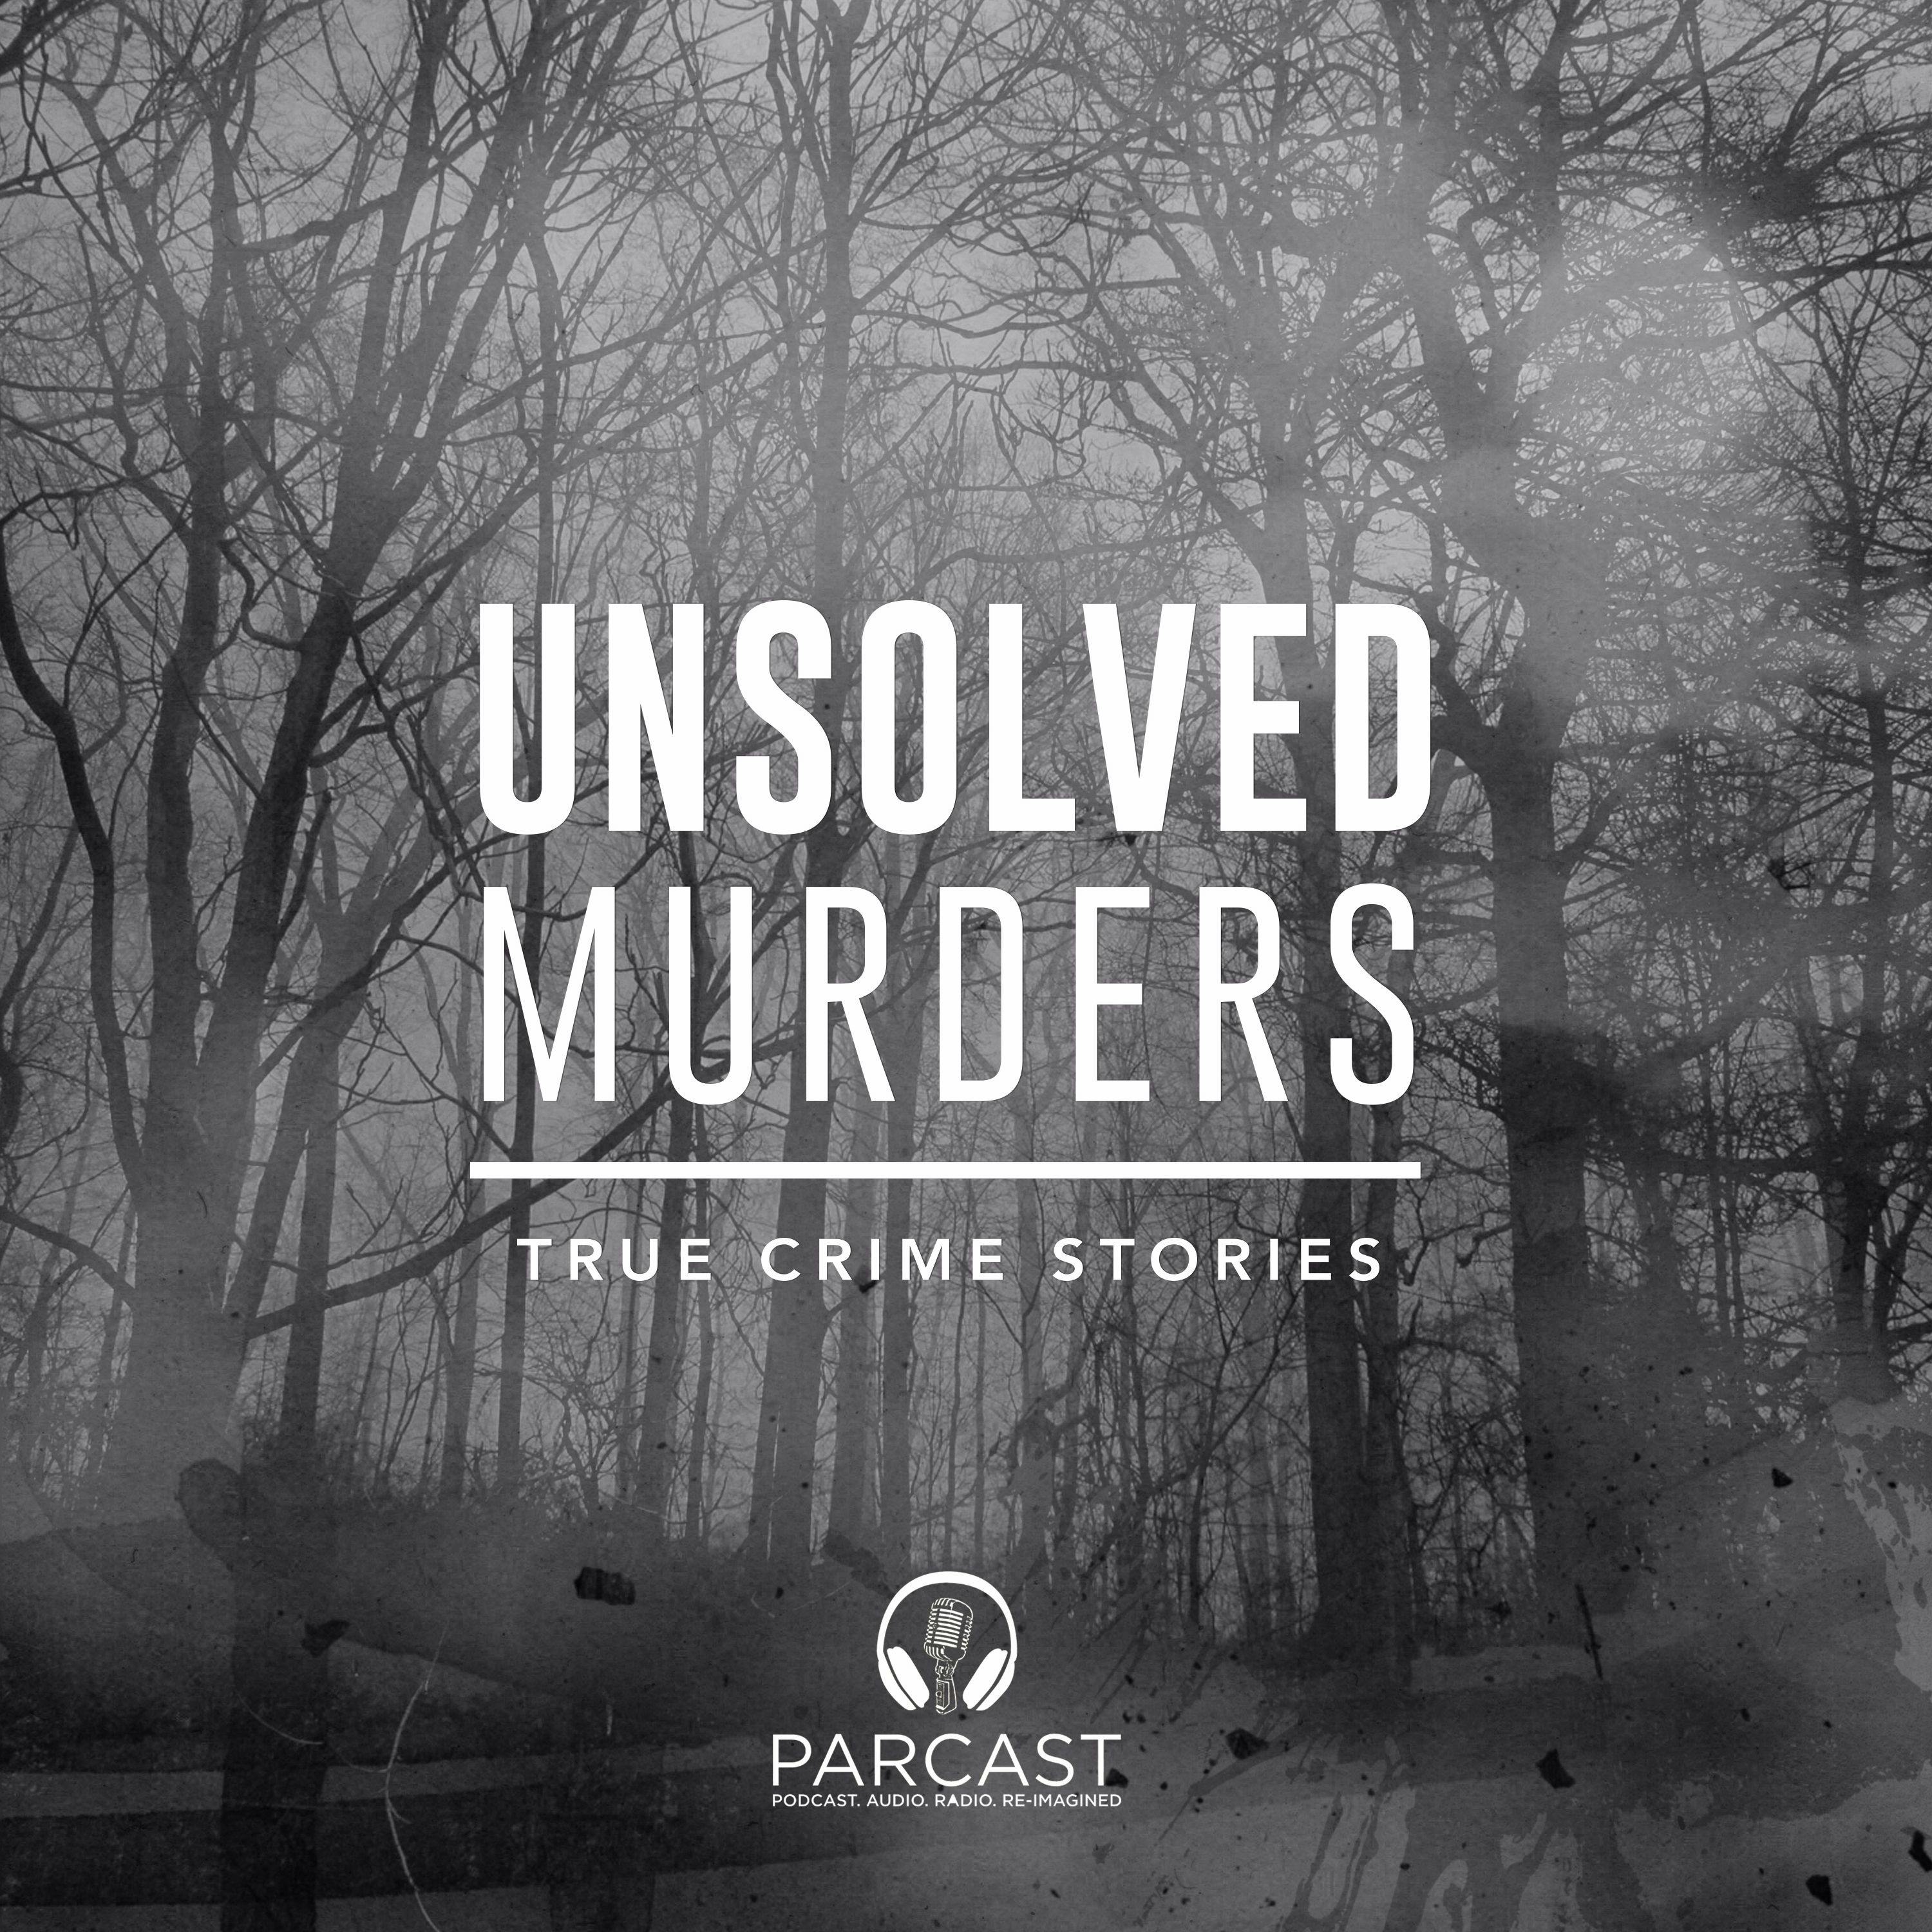 Welcome to Unsolved Murders!